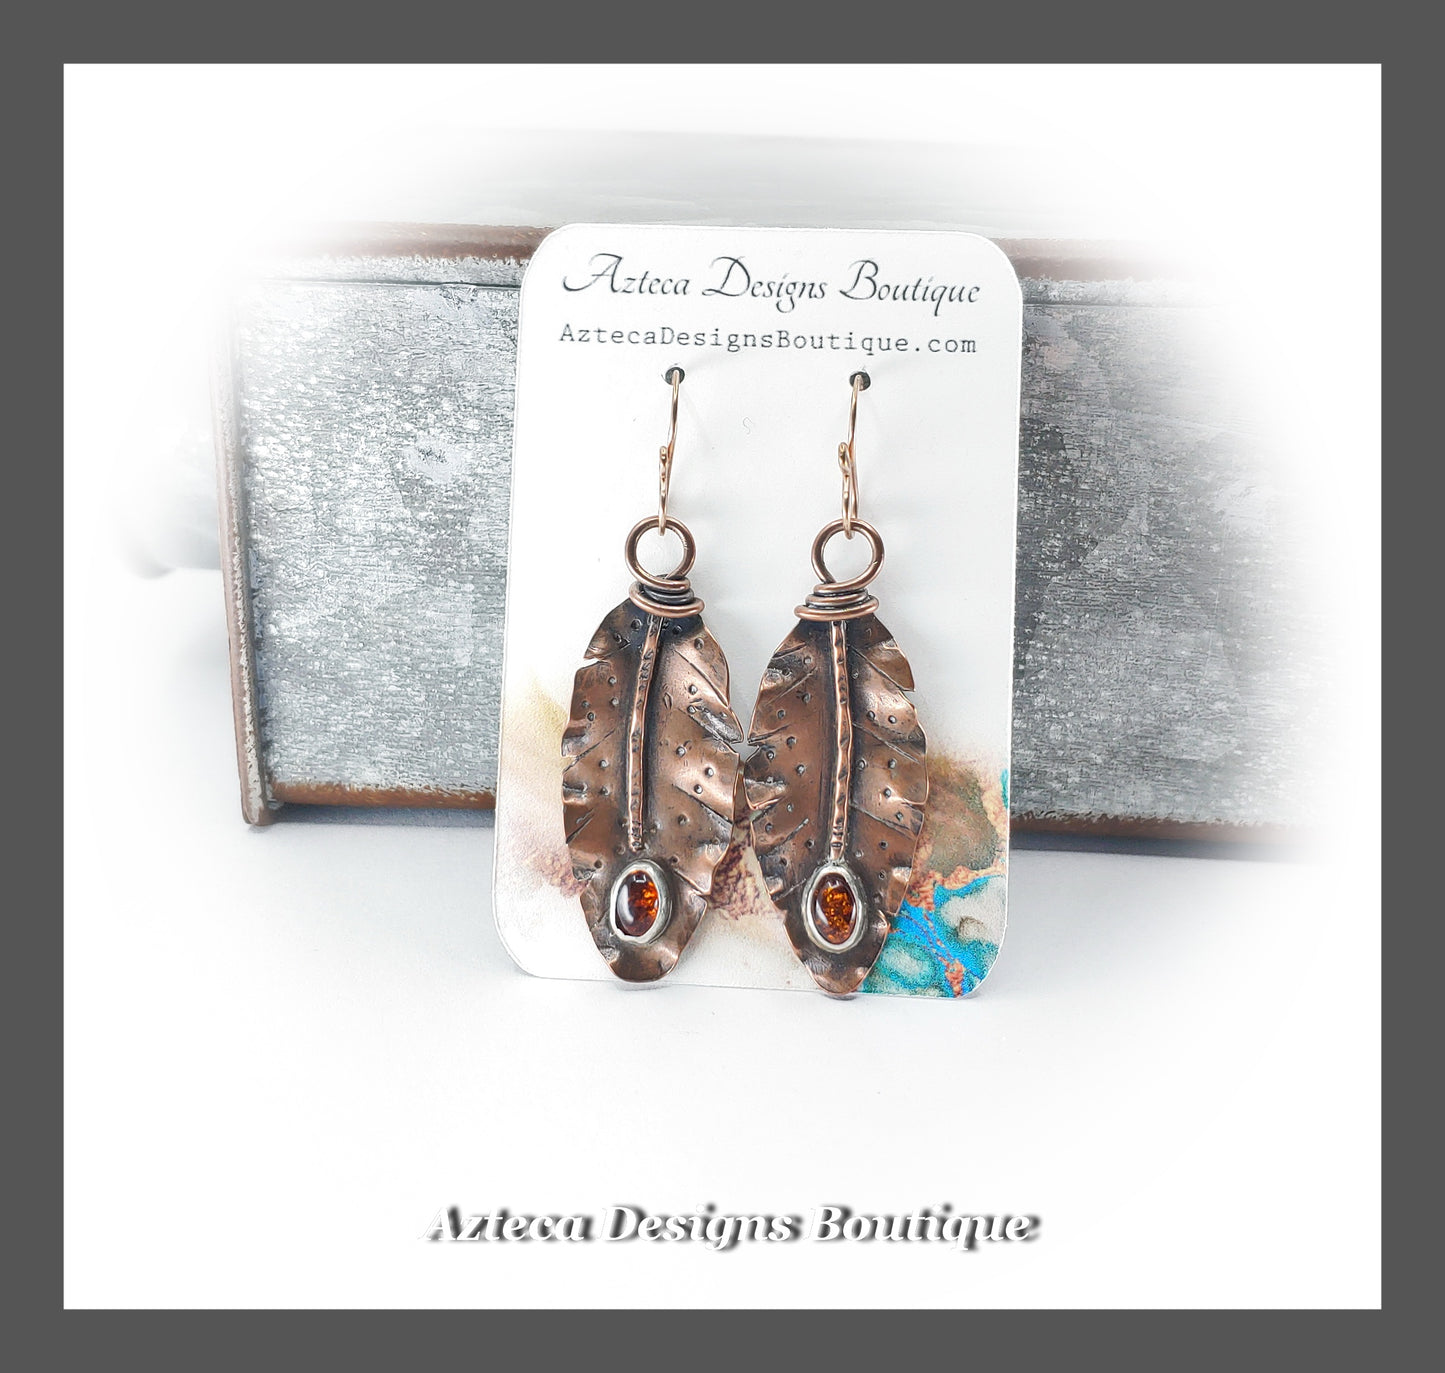 Copper + Amber + Hand Fabricated Rustic Earrings With Rose Gold Filled Ear Wires